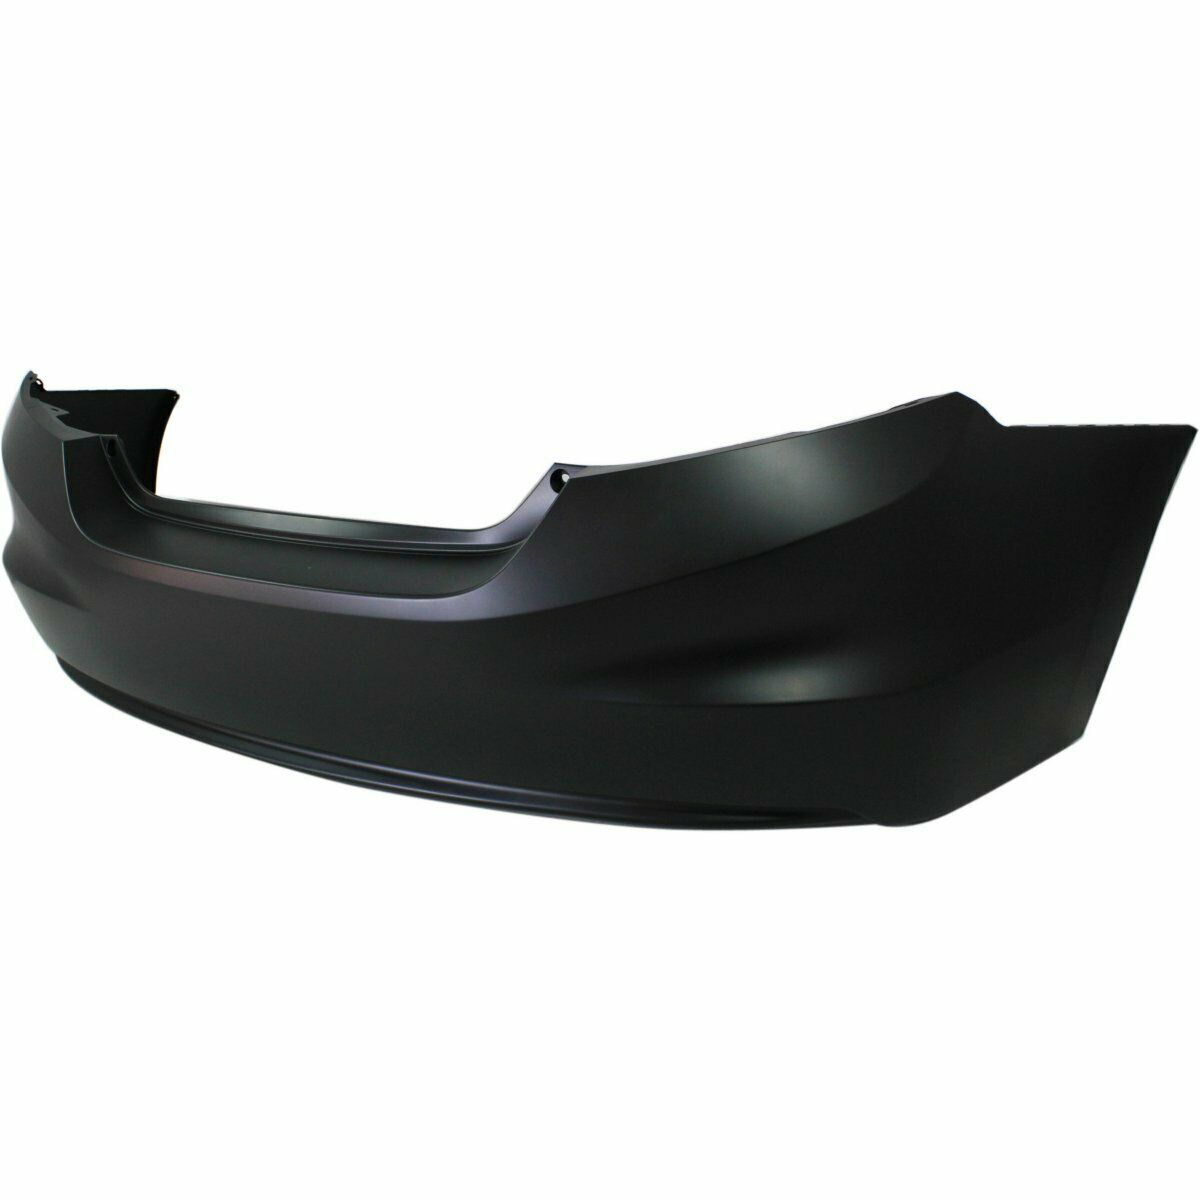 2012-2013 Honda Civic Coupe Rear Bumper Painted to Match